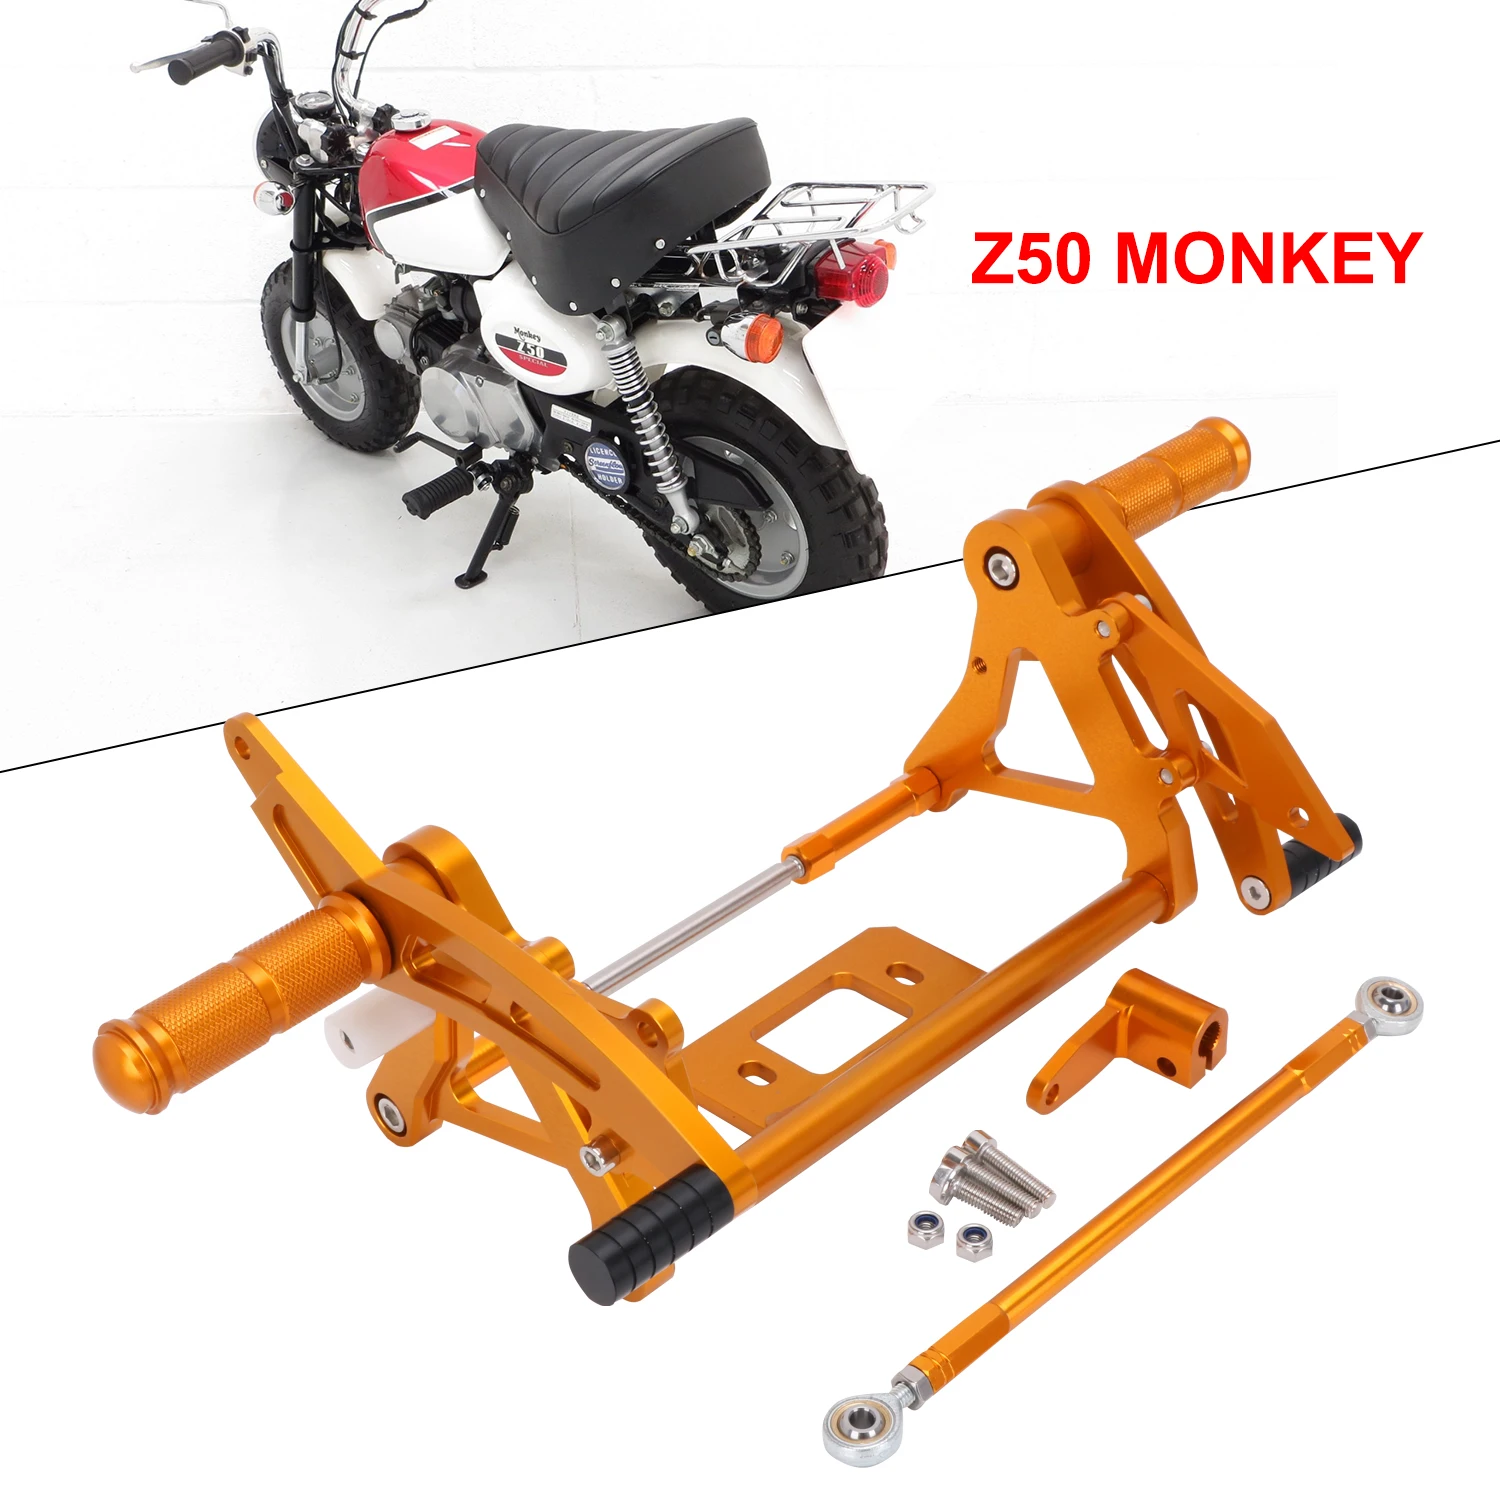 

Motorcycle CNC Adjustable Billet Foot Pegs Pedals Rest Footpegs For HONDA Z50 Z 50 Monkey